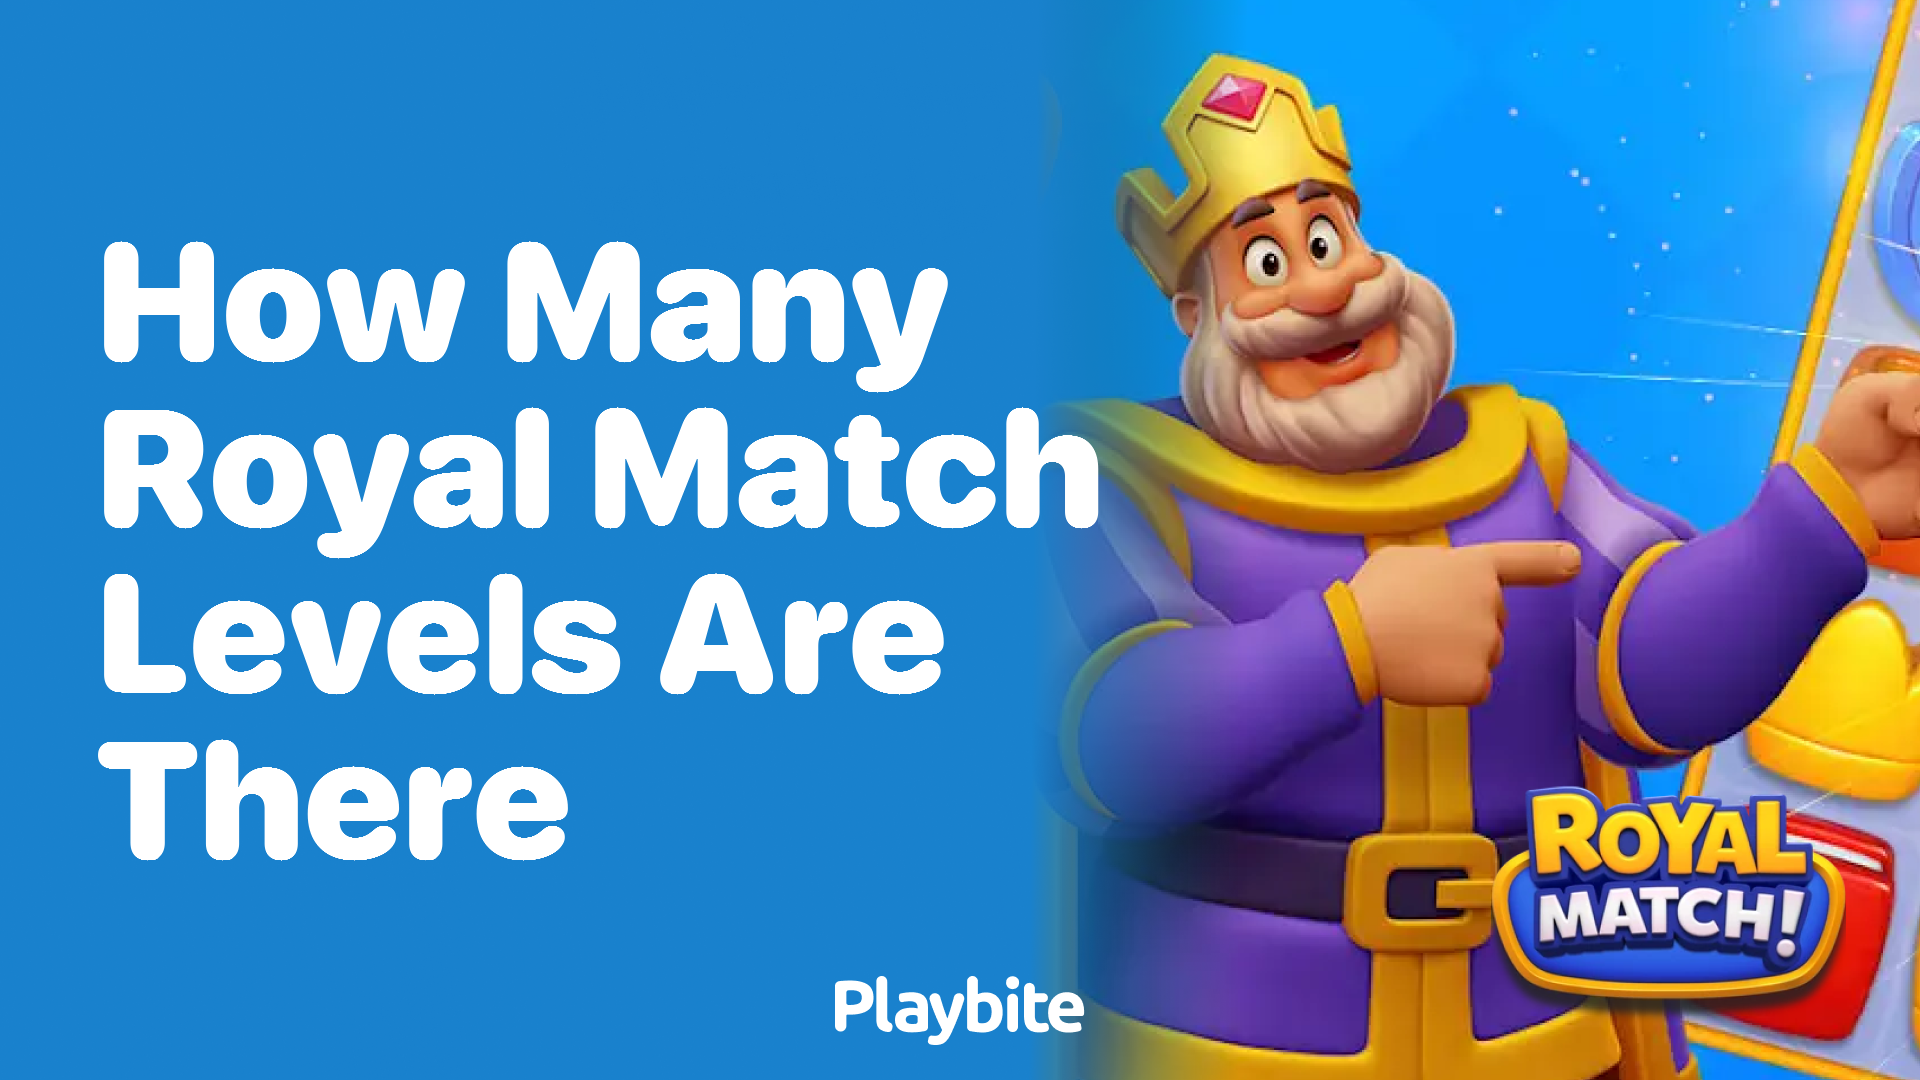 How Many Royal Match Levels Are There?